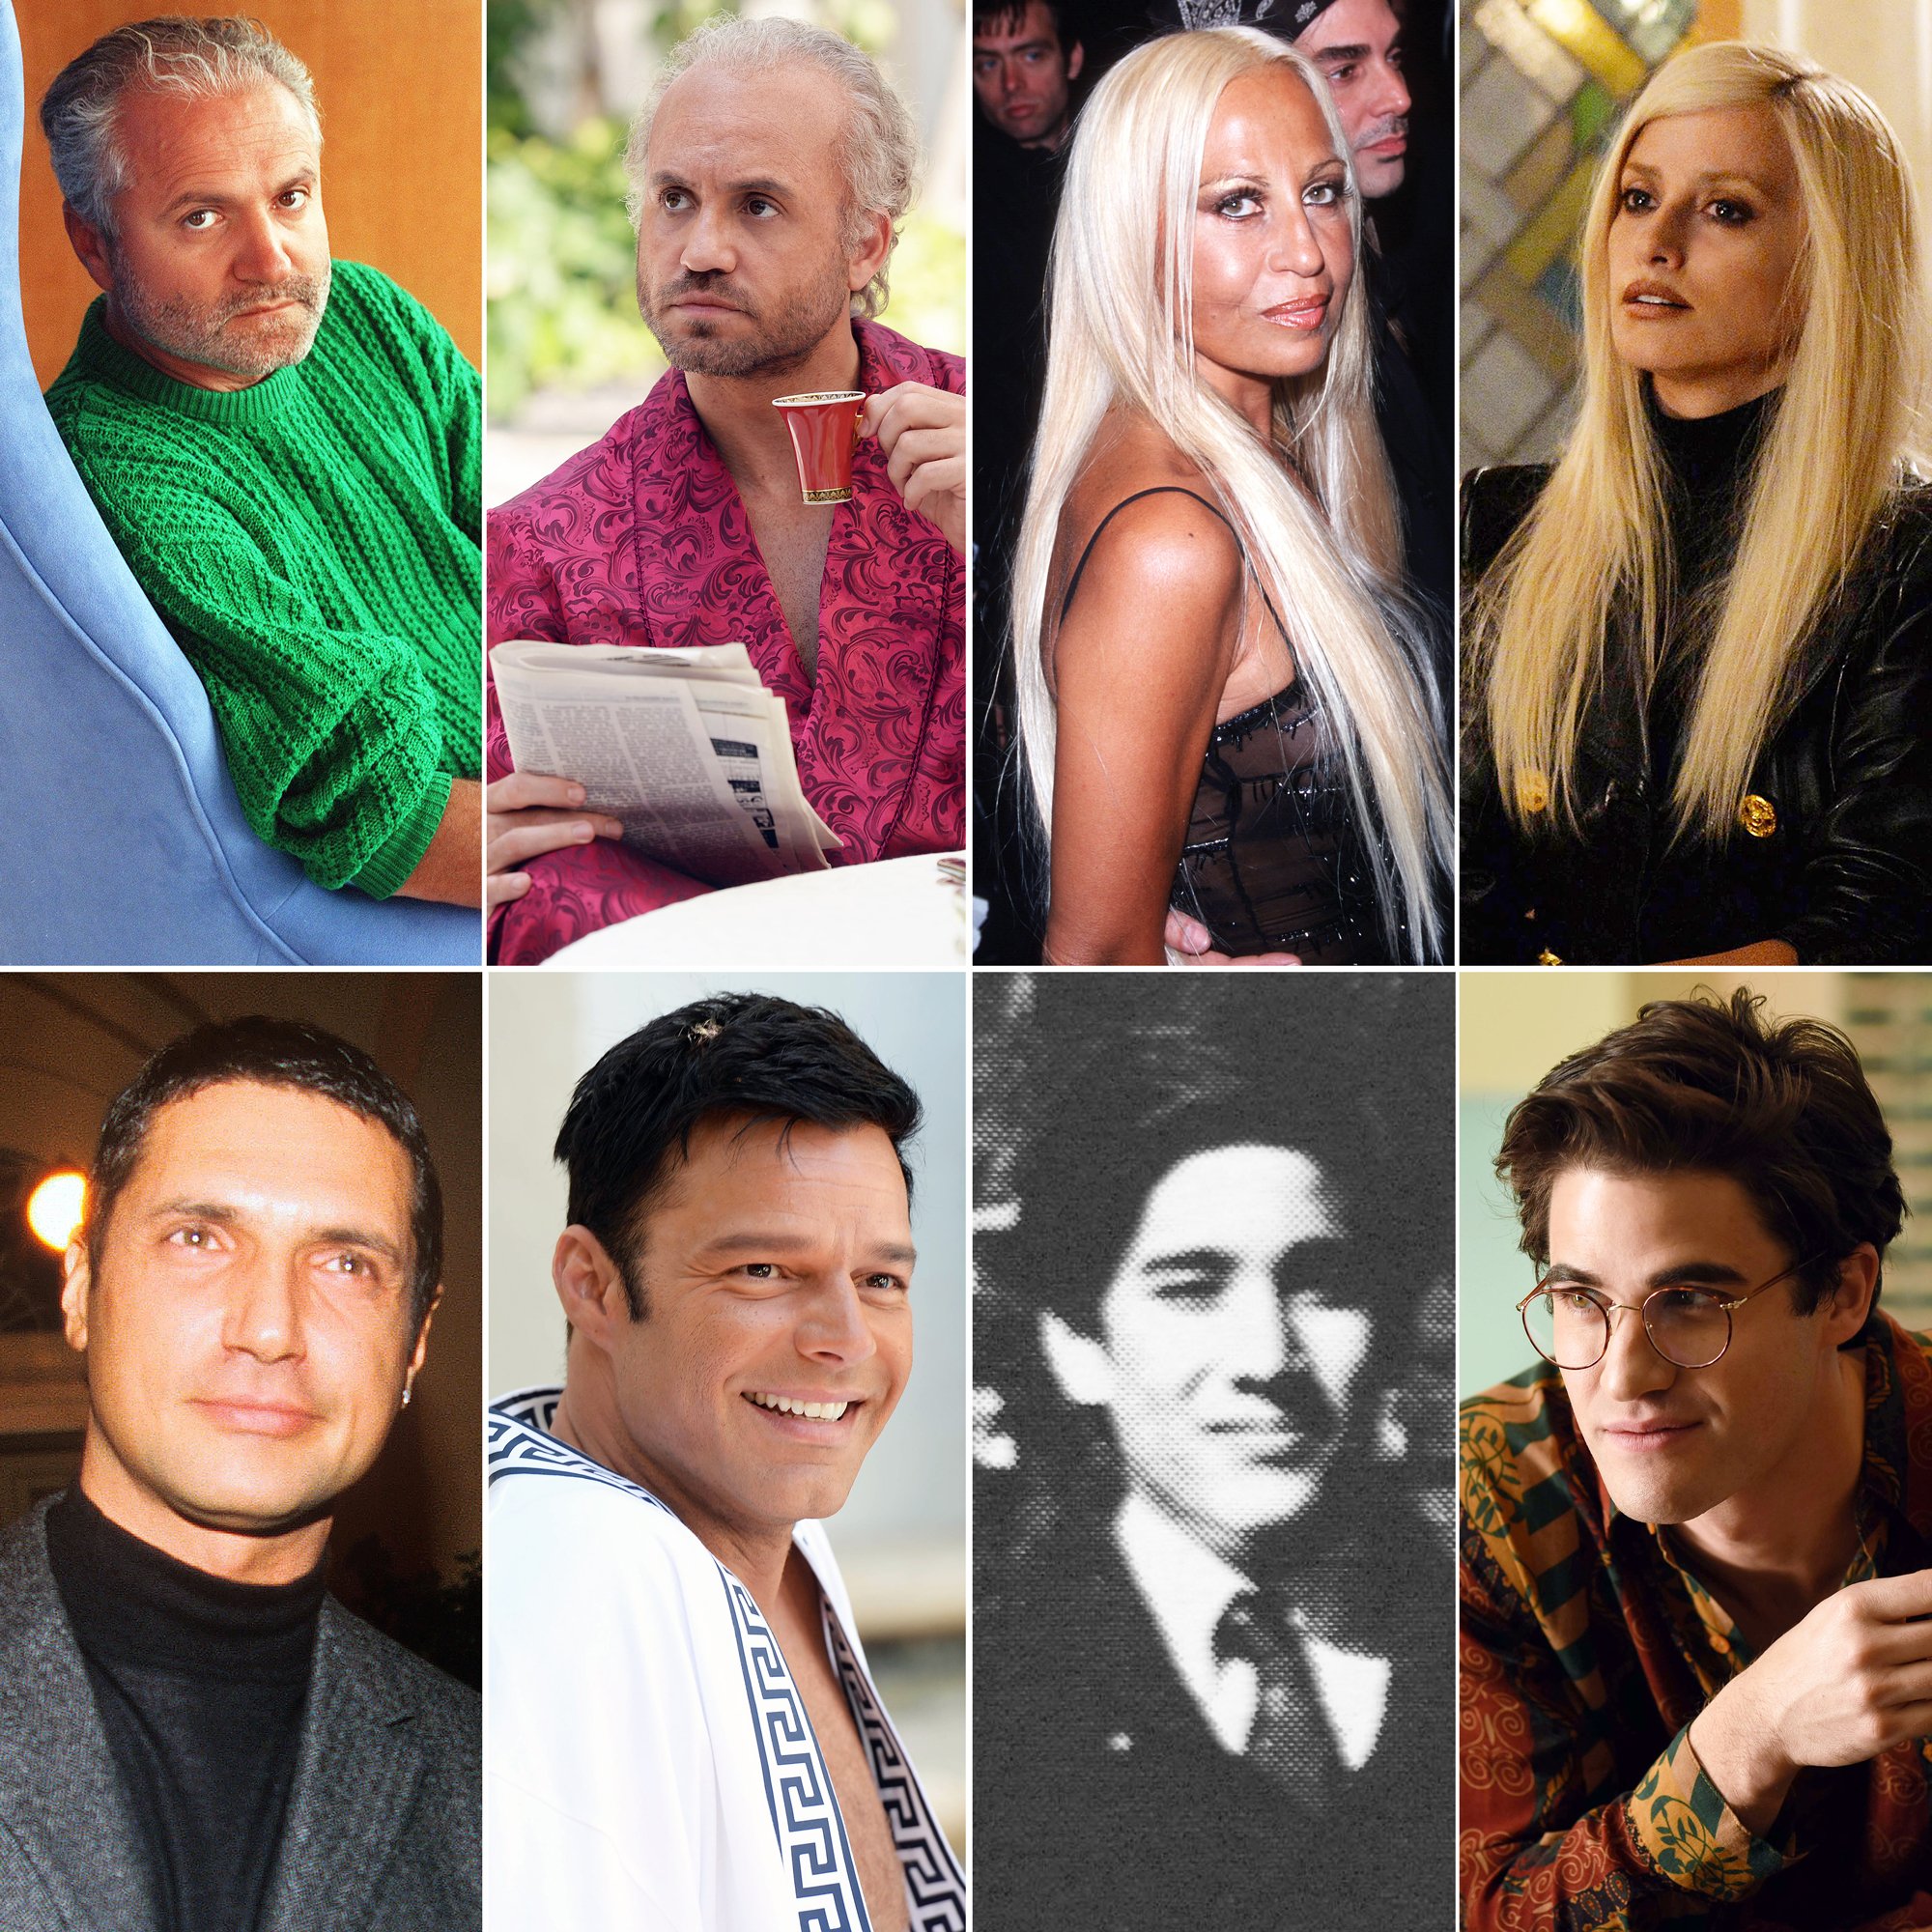 Contribution Queen Sanction Assassination of Gianni Versace' Cast vs. Real-Life People They Portray